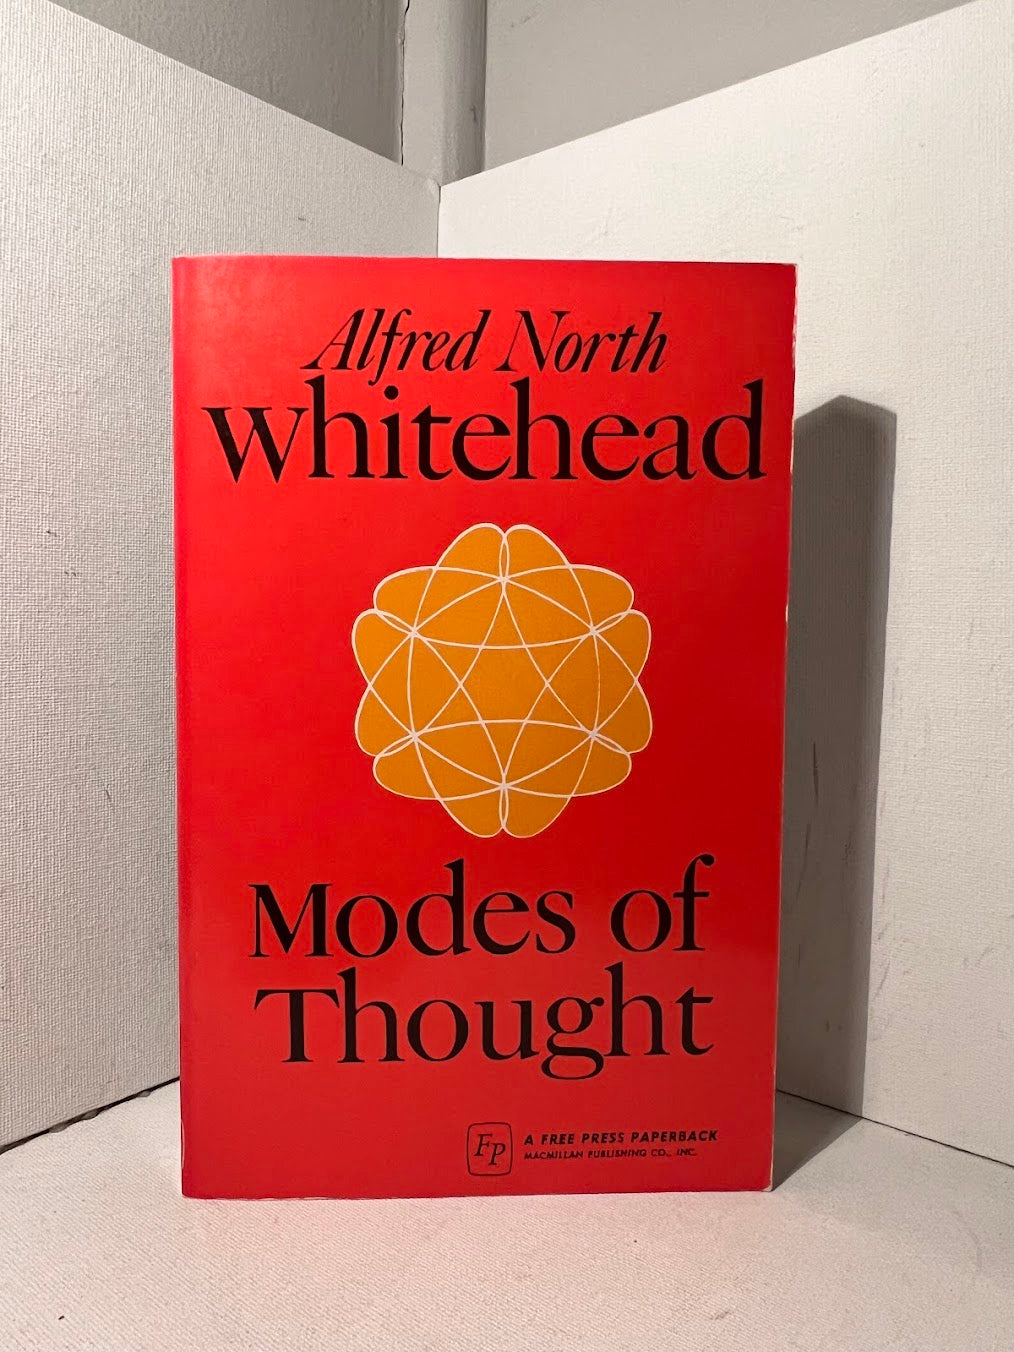 Modes of Thought by Alfred North Whitehead